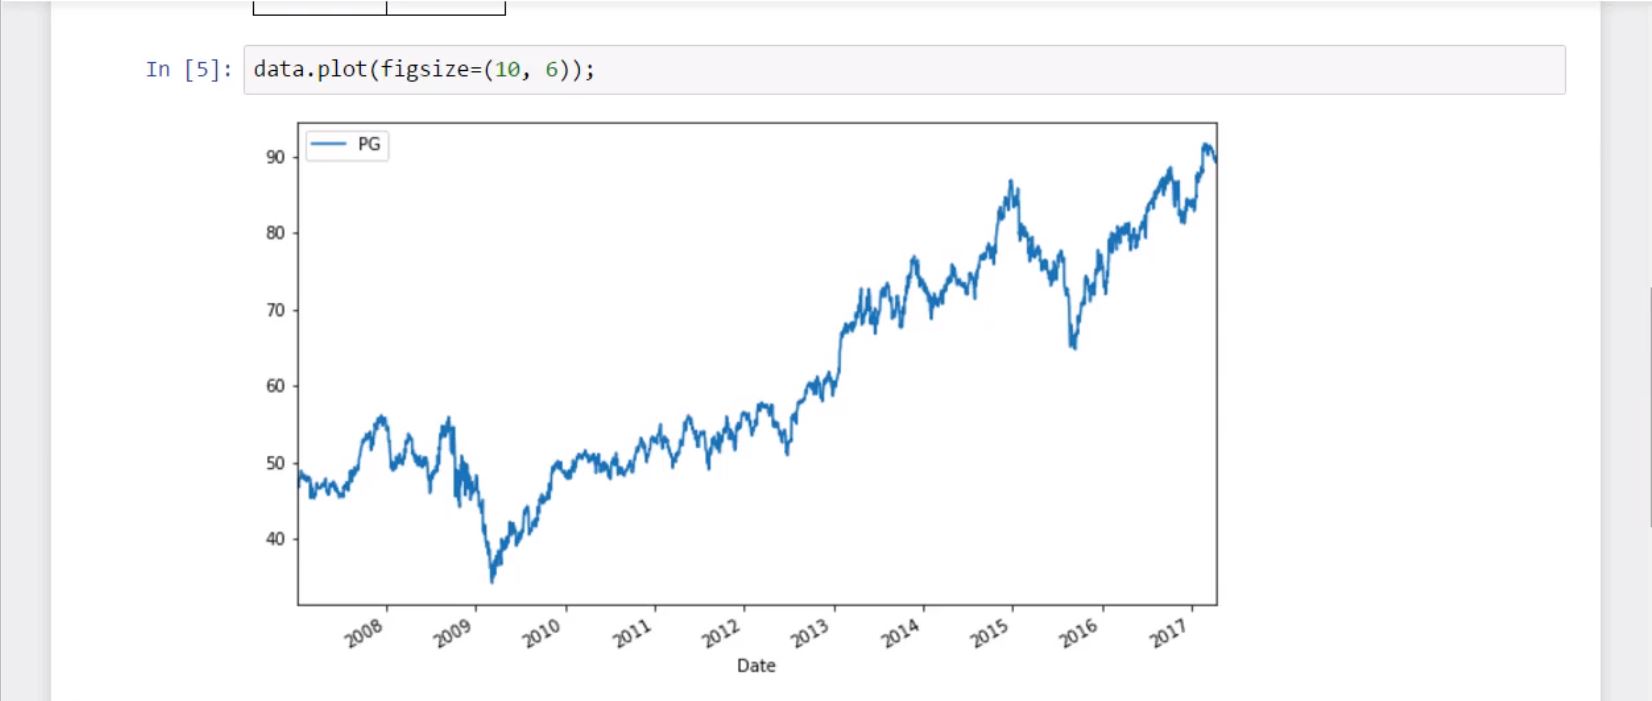 how-to-apply-monte-carlo-simulation-to-forecast-stock-prices-using-python-datascience